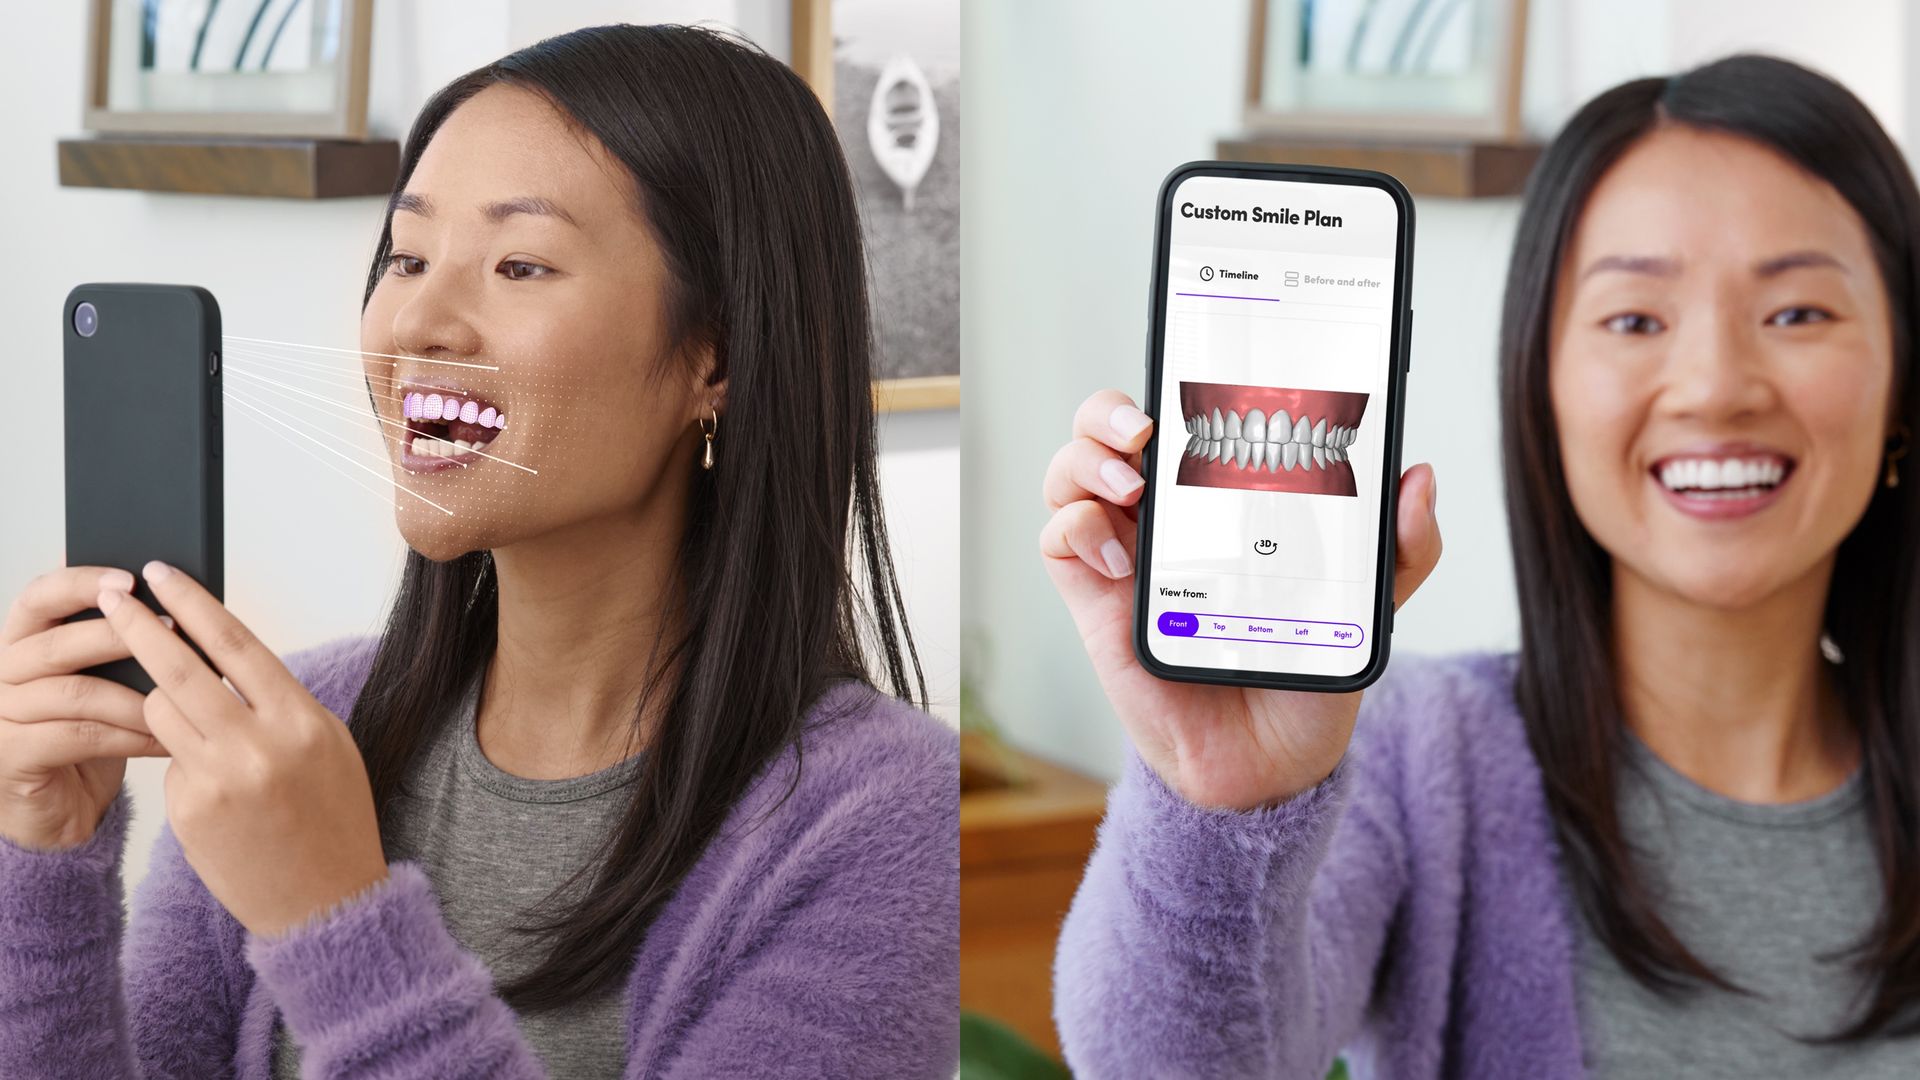 A woman points a phone at her face to scan her teeth